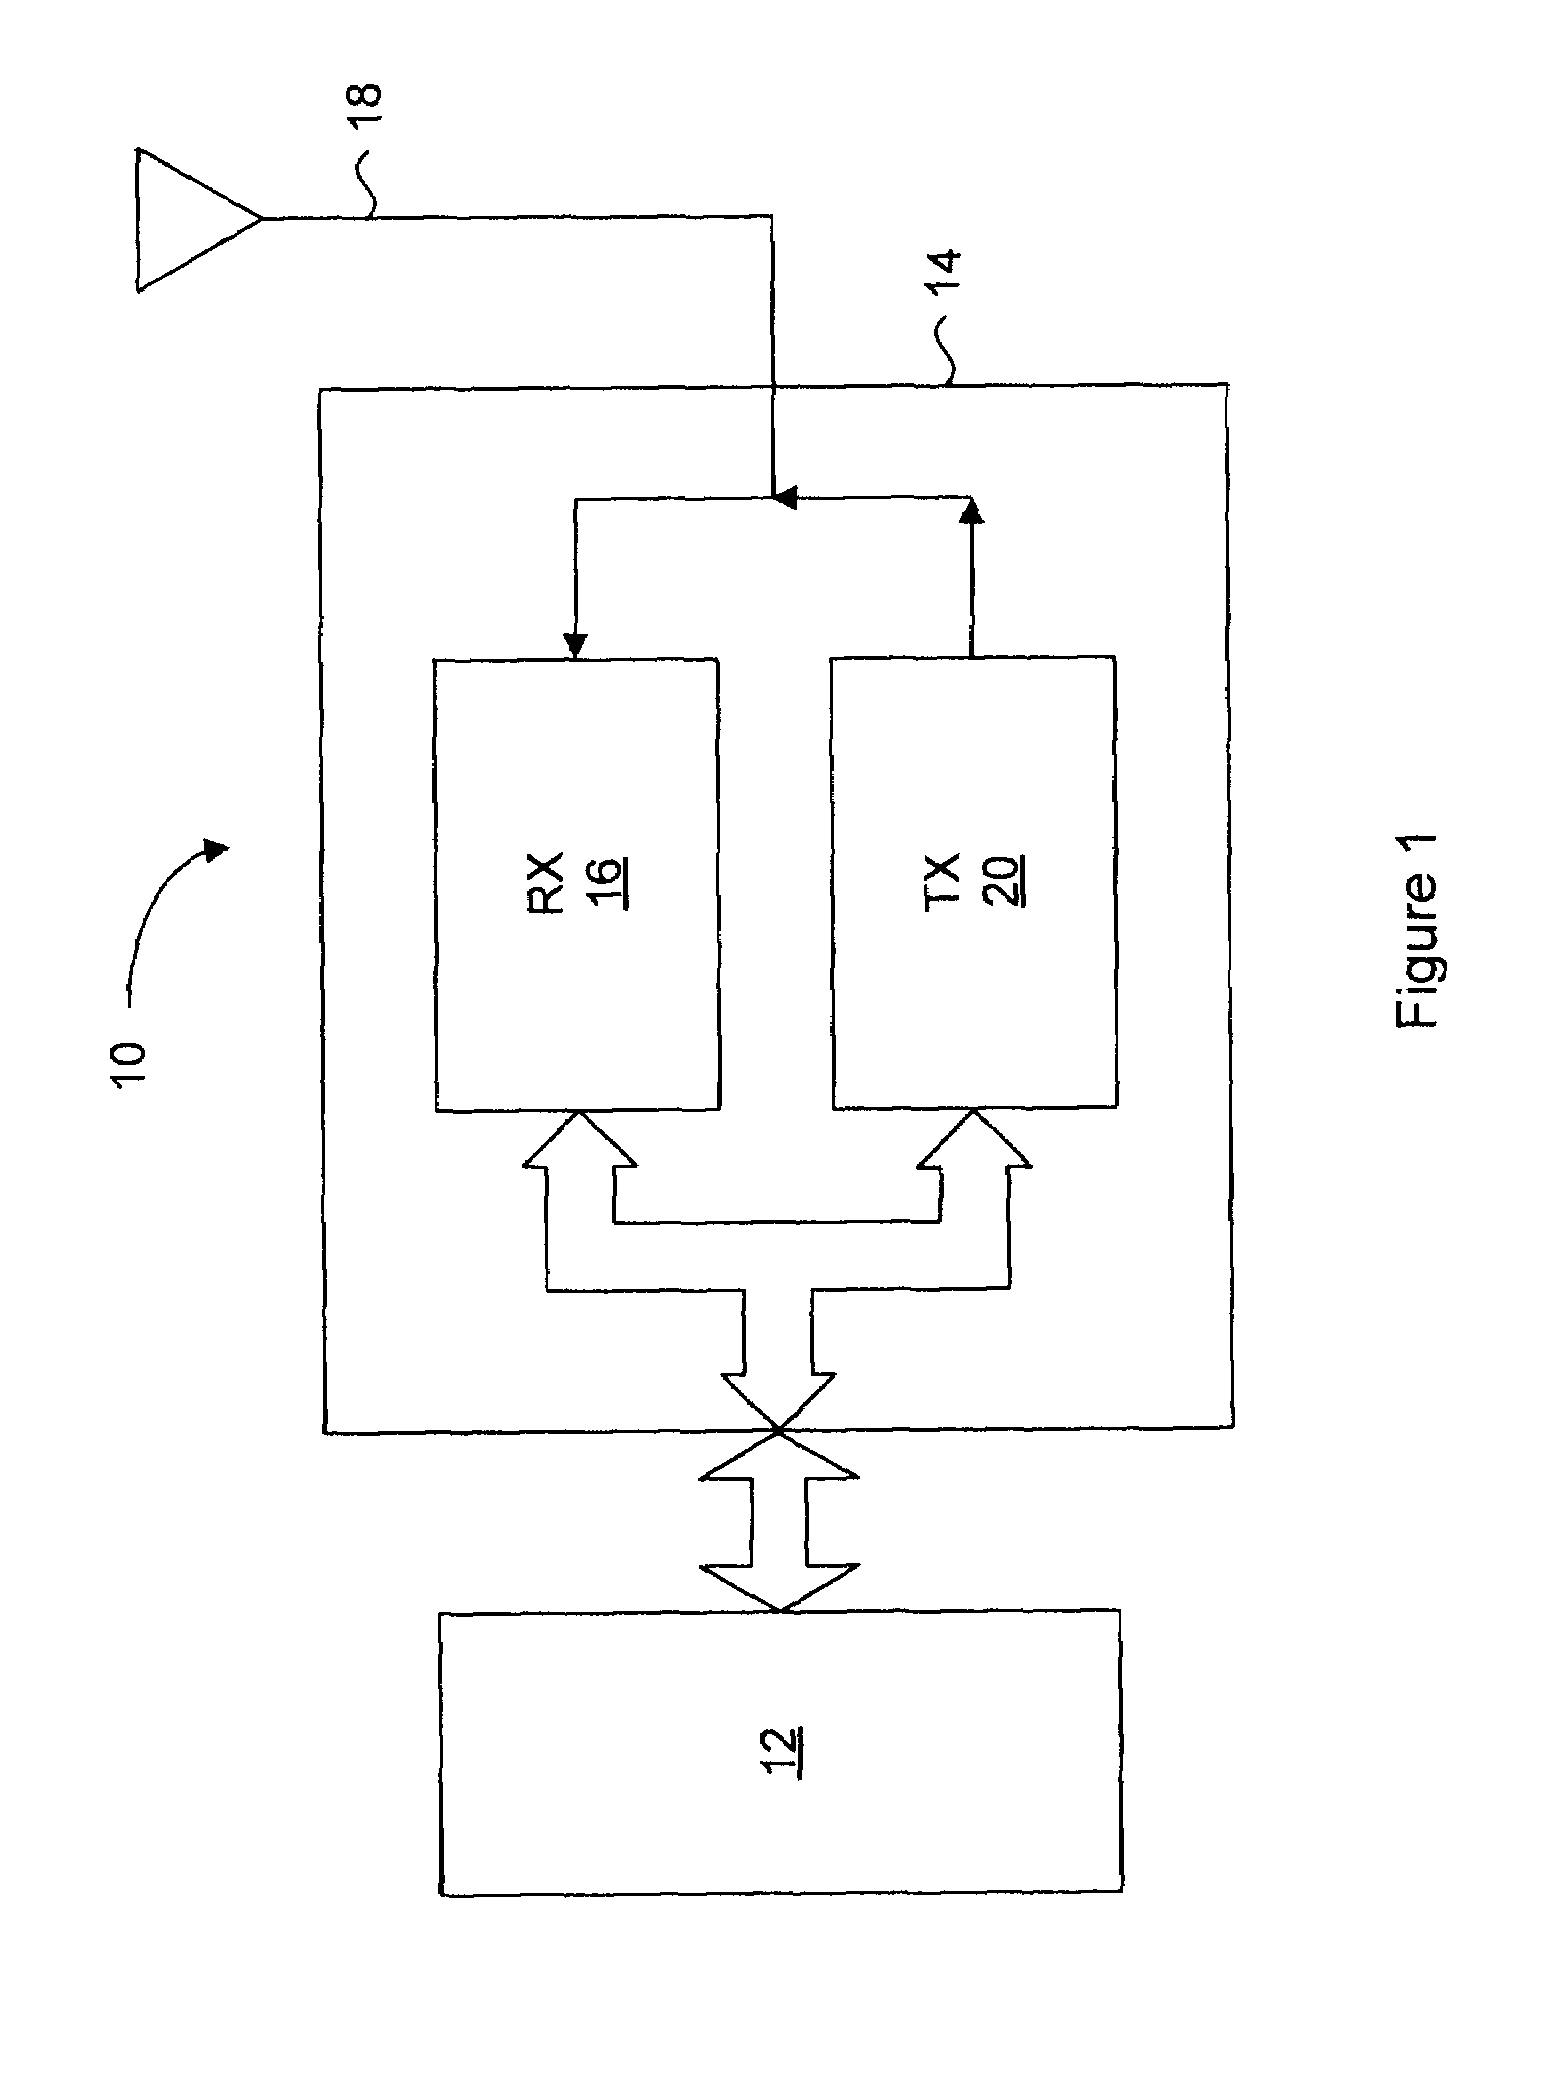 Current controlled biasing for current-steering based RF variable gain amplifiers